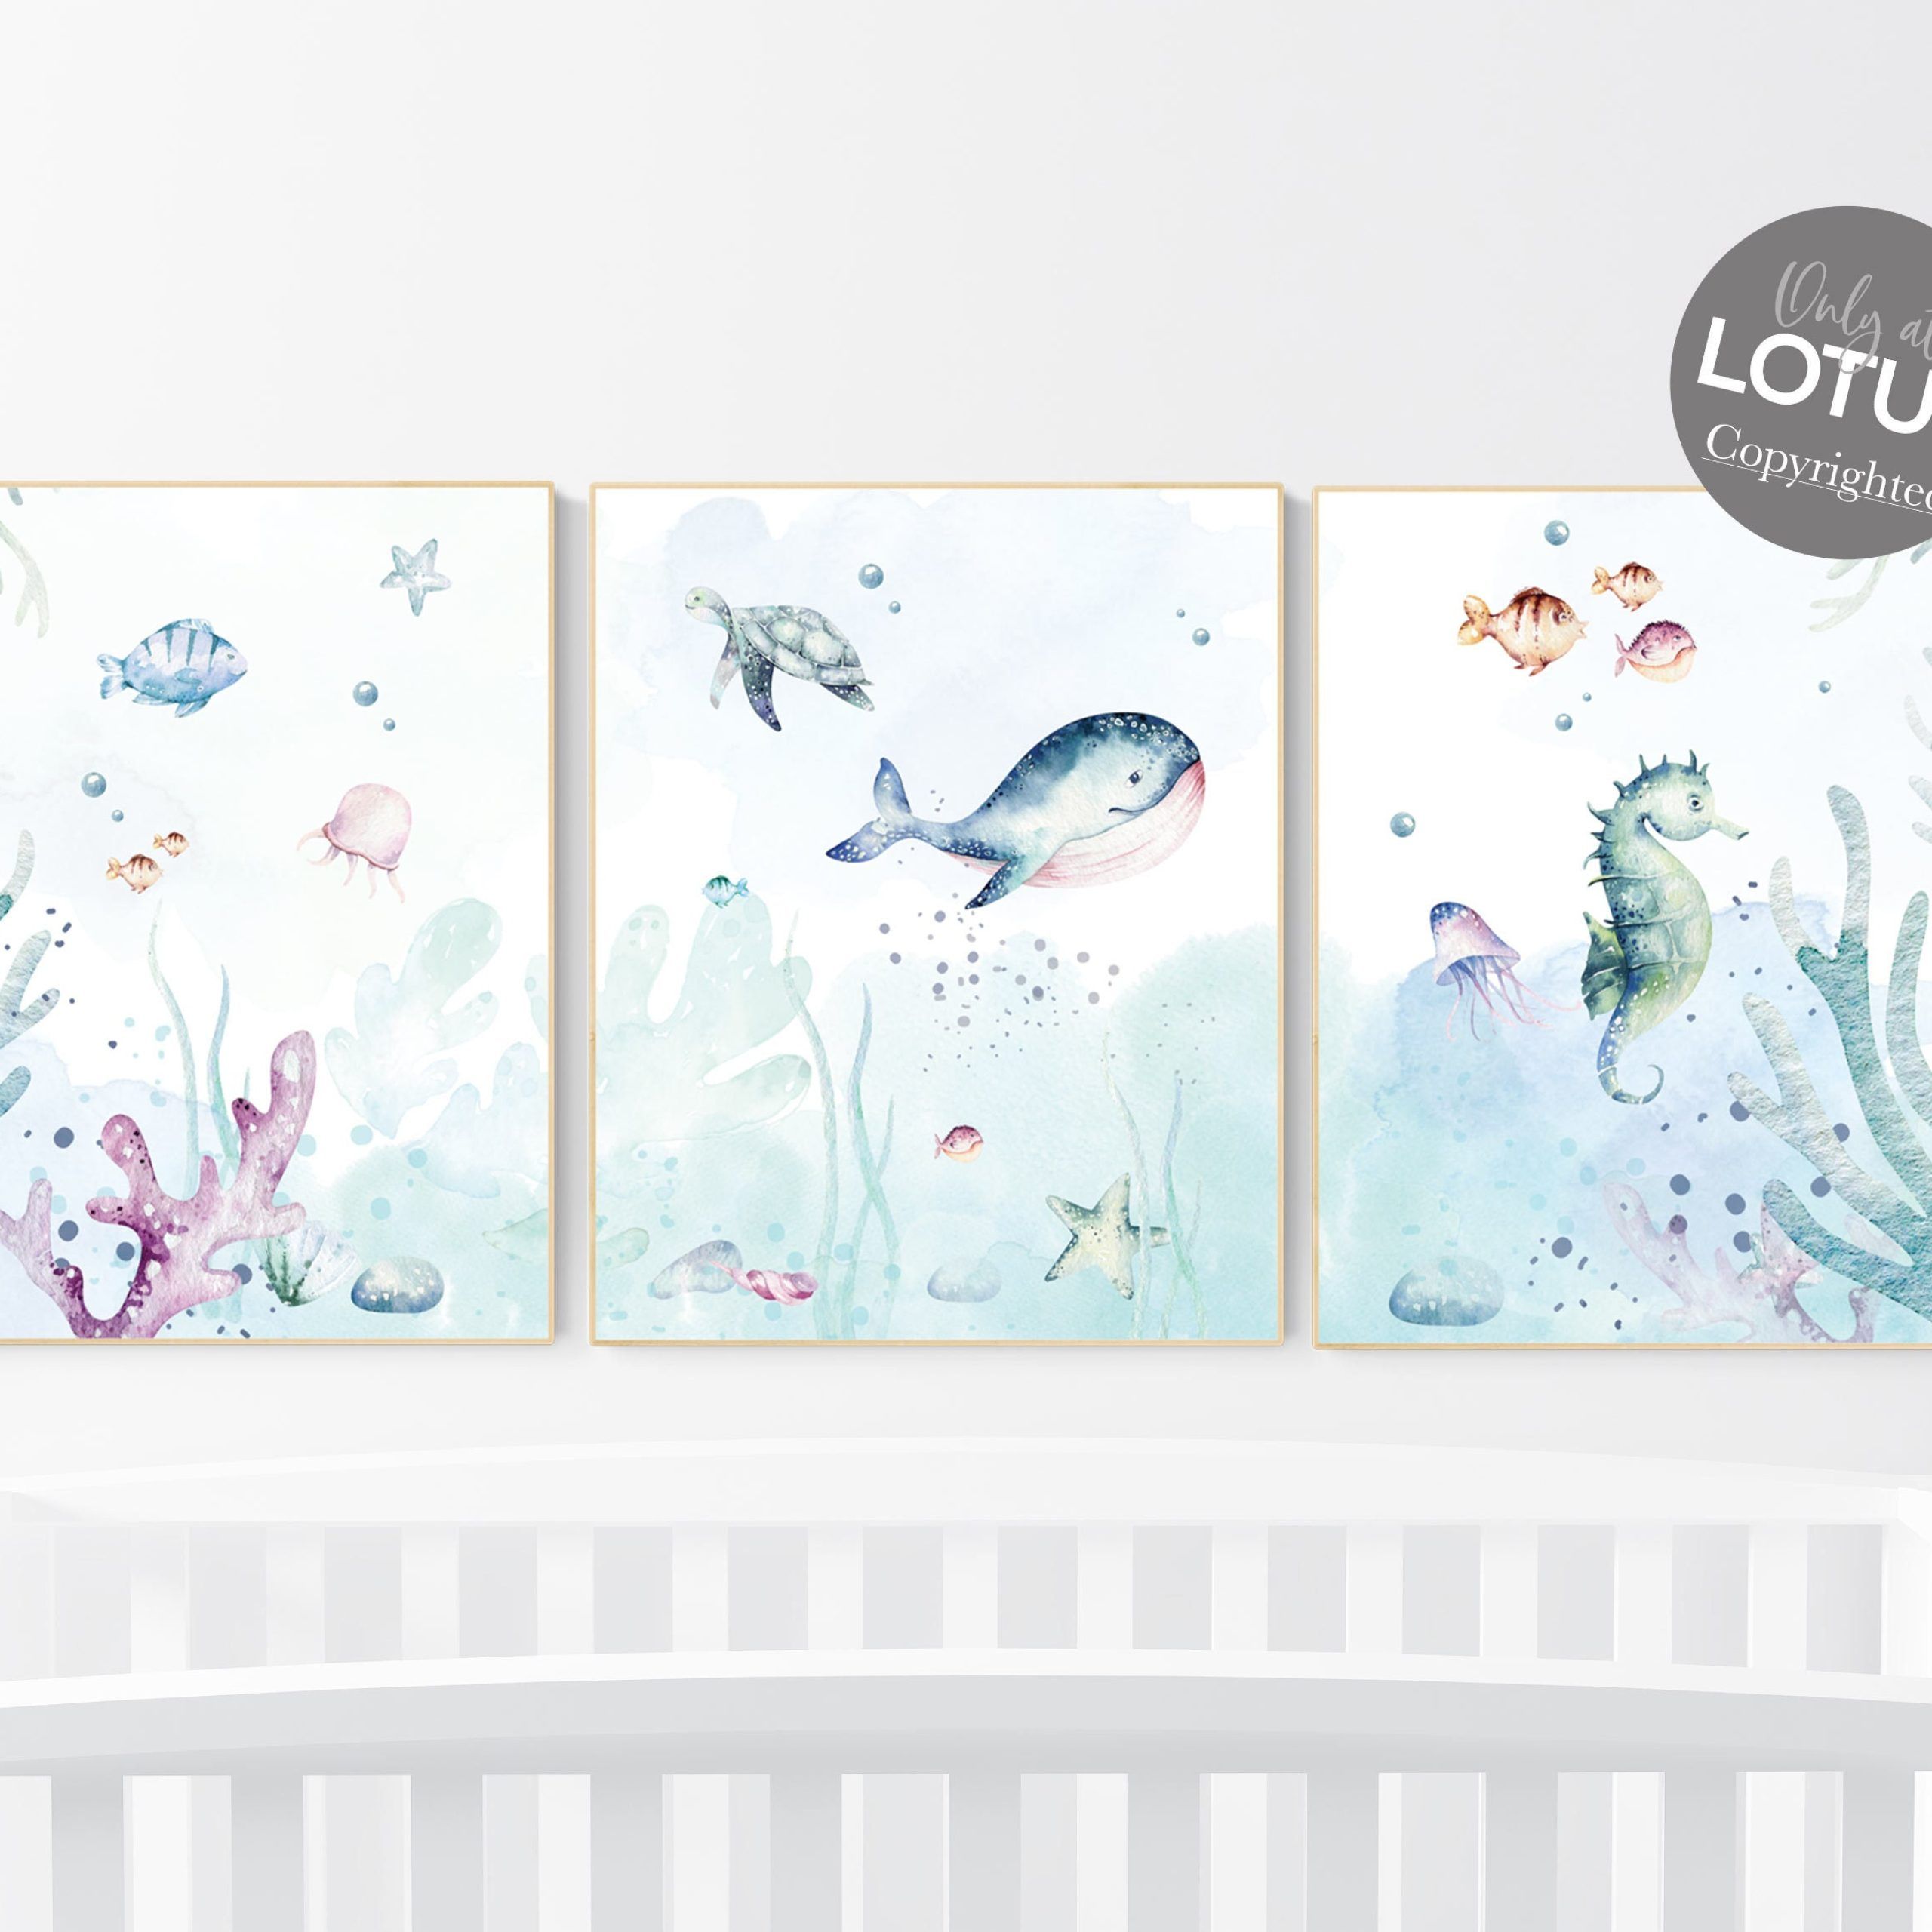 Canvas Listing: Under The Sea Wall Art Ocean Nursery Decor – Etsy Intended For The Seawall Art (View 13 of 15)